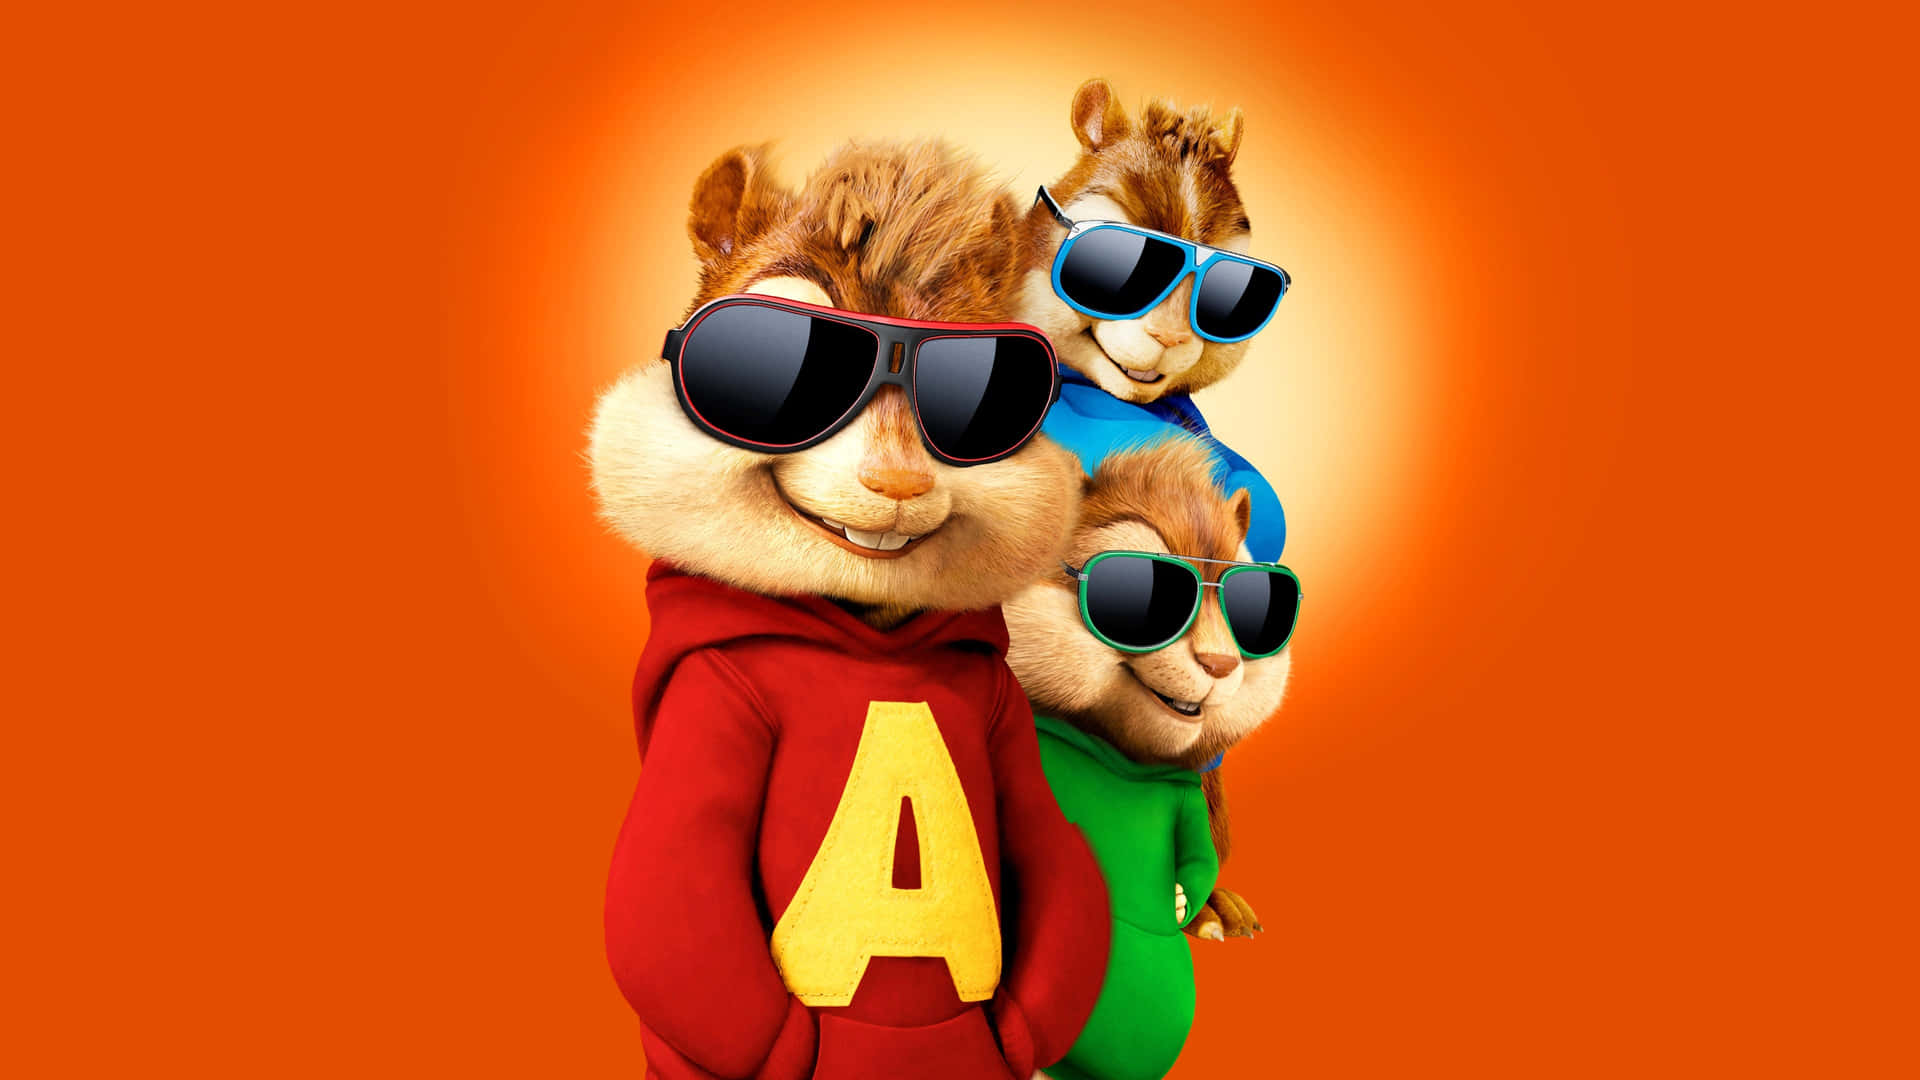 Alvin And The Chipmunks Pictures Wallpaper